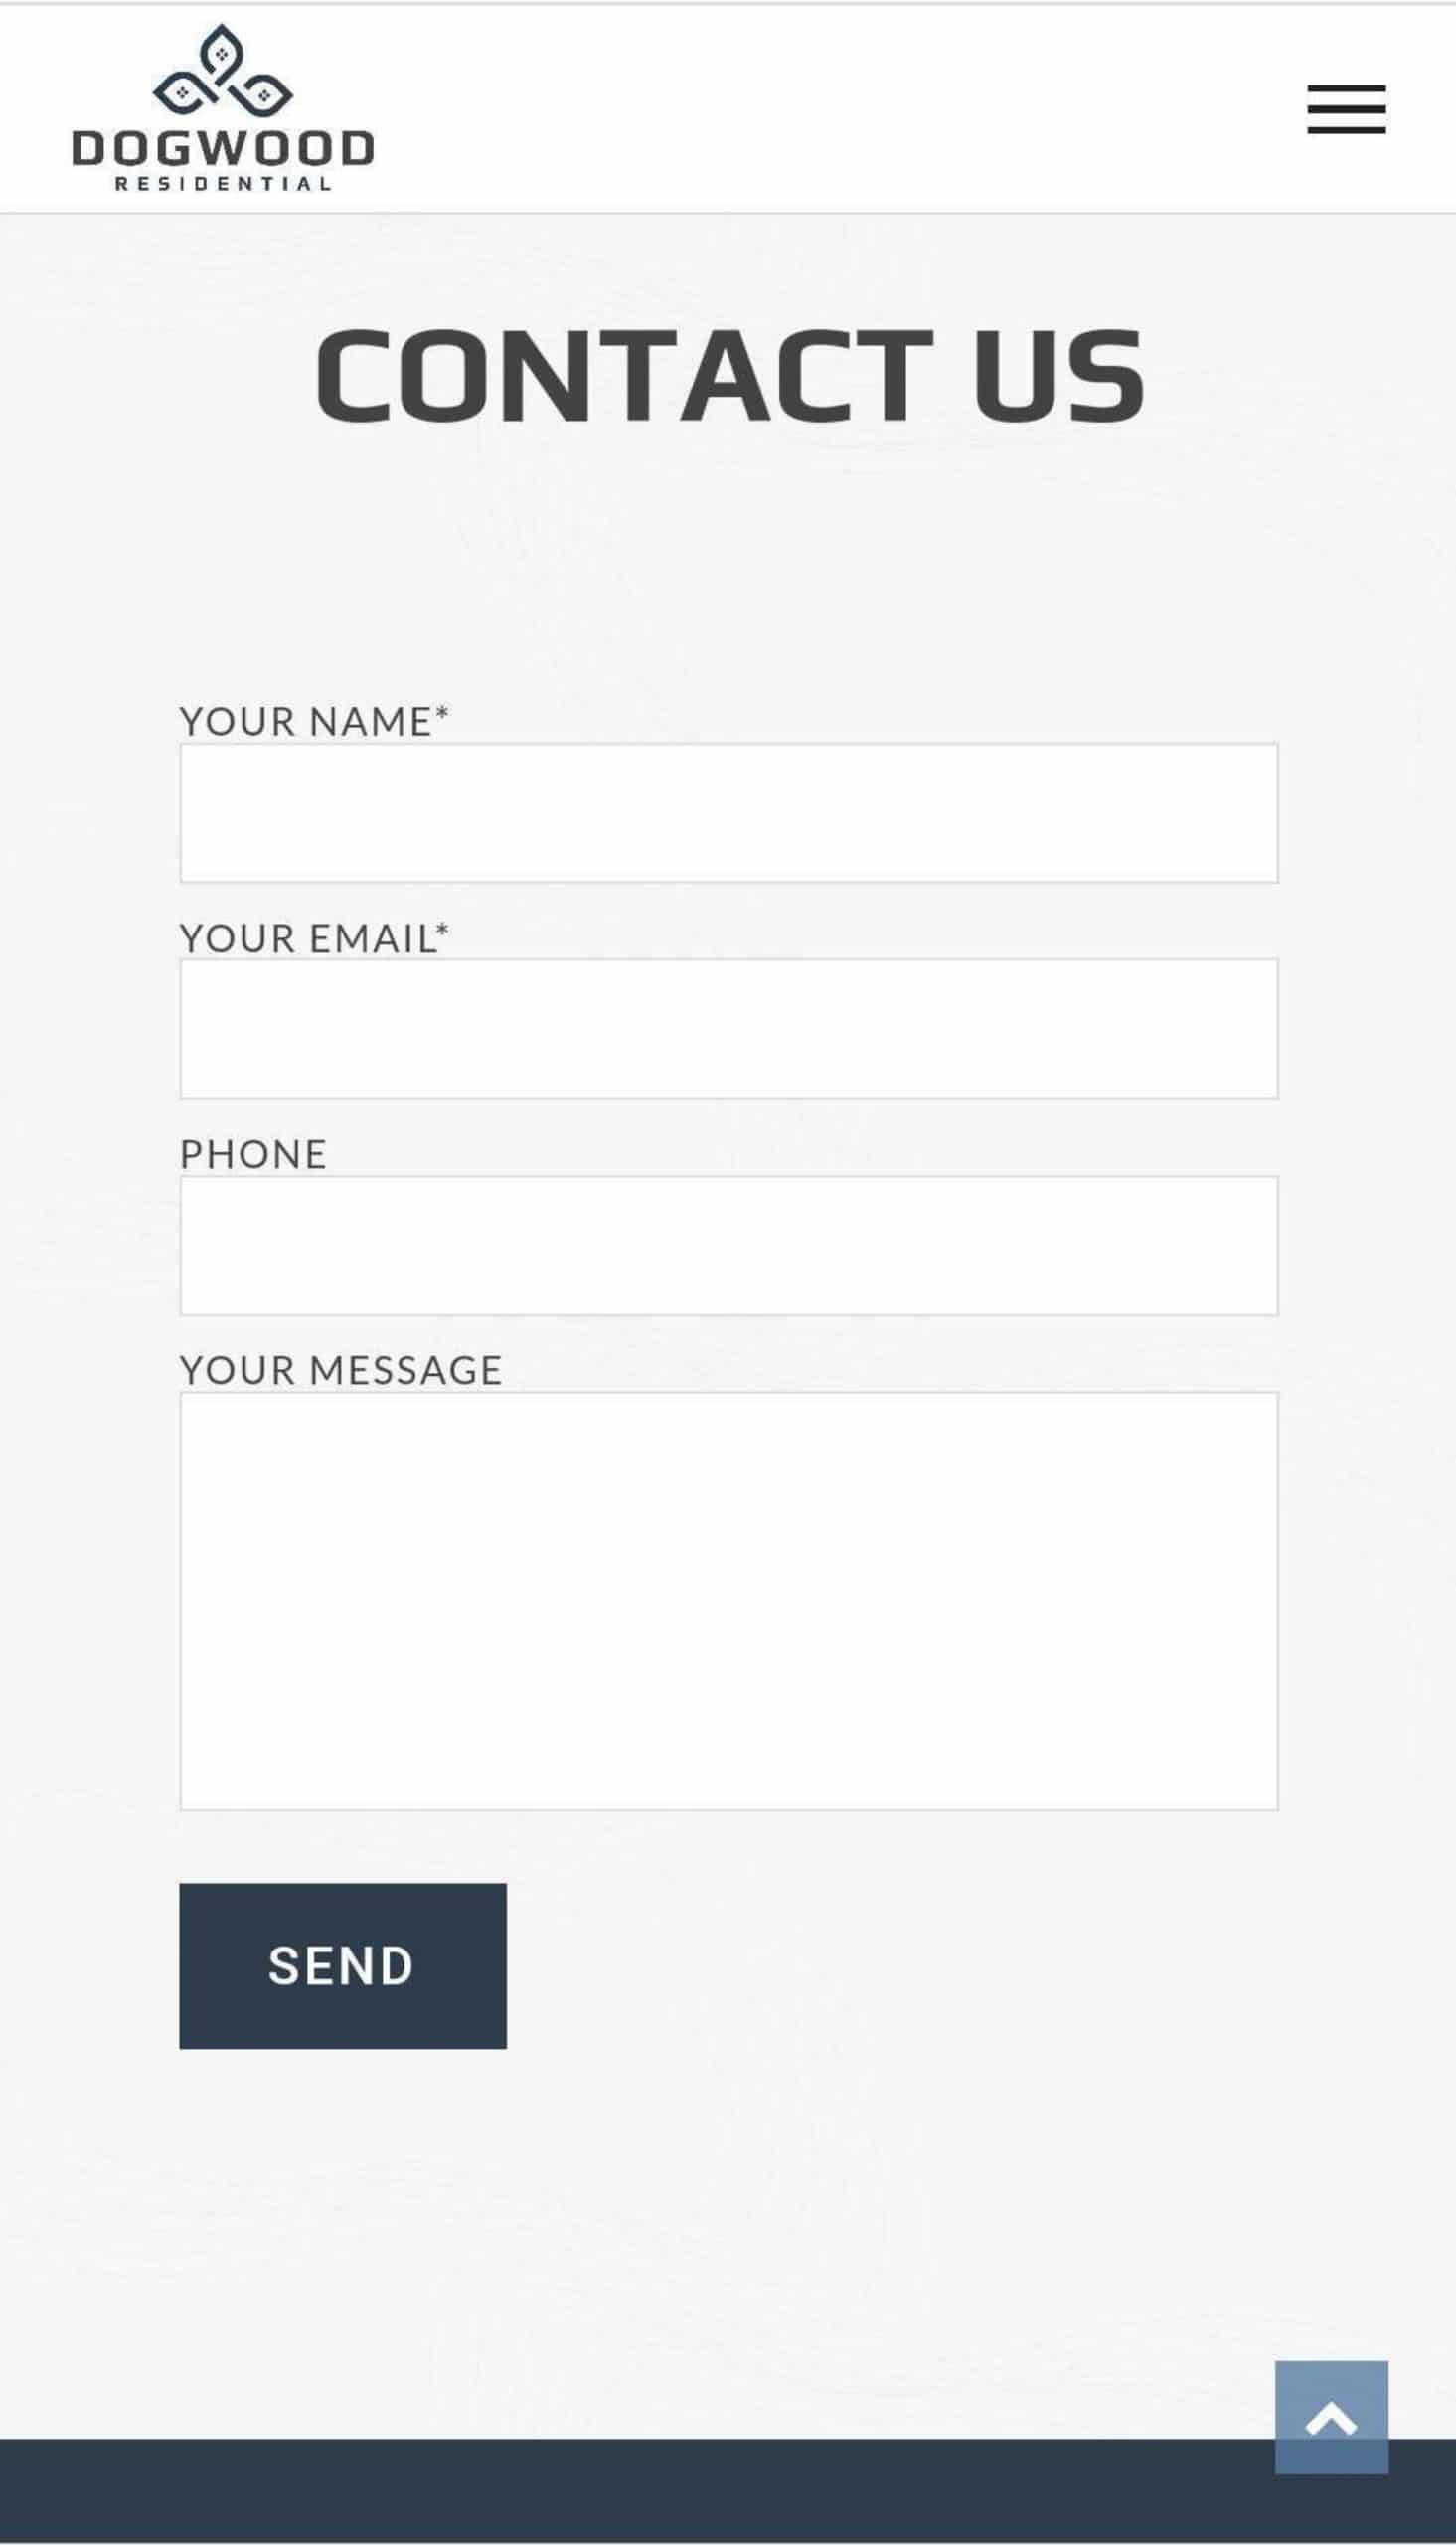 Mobile responsive mockups of Dogwood Residential contact form